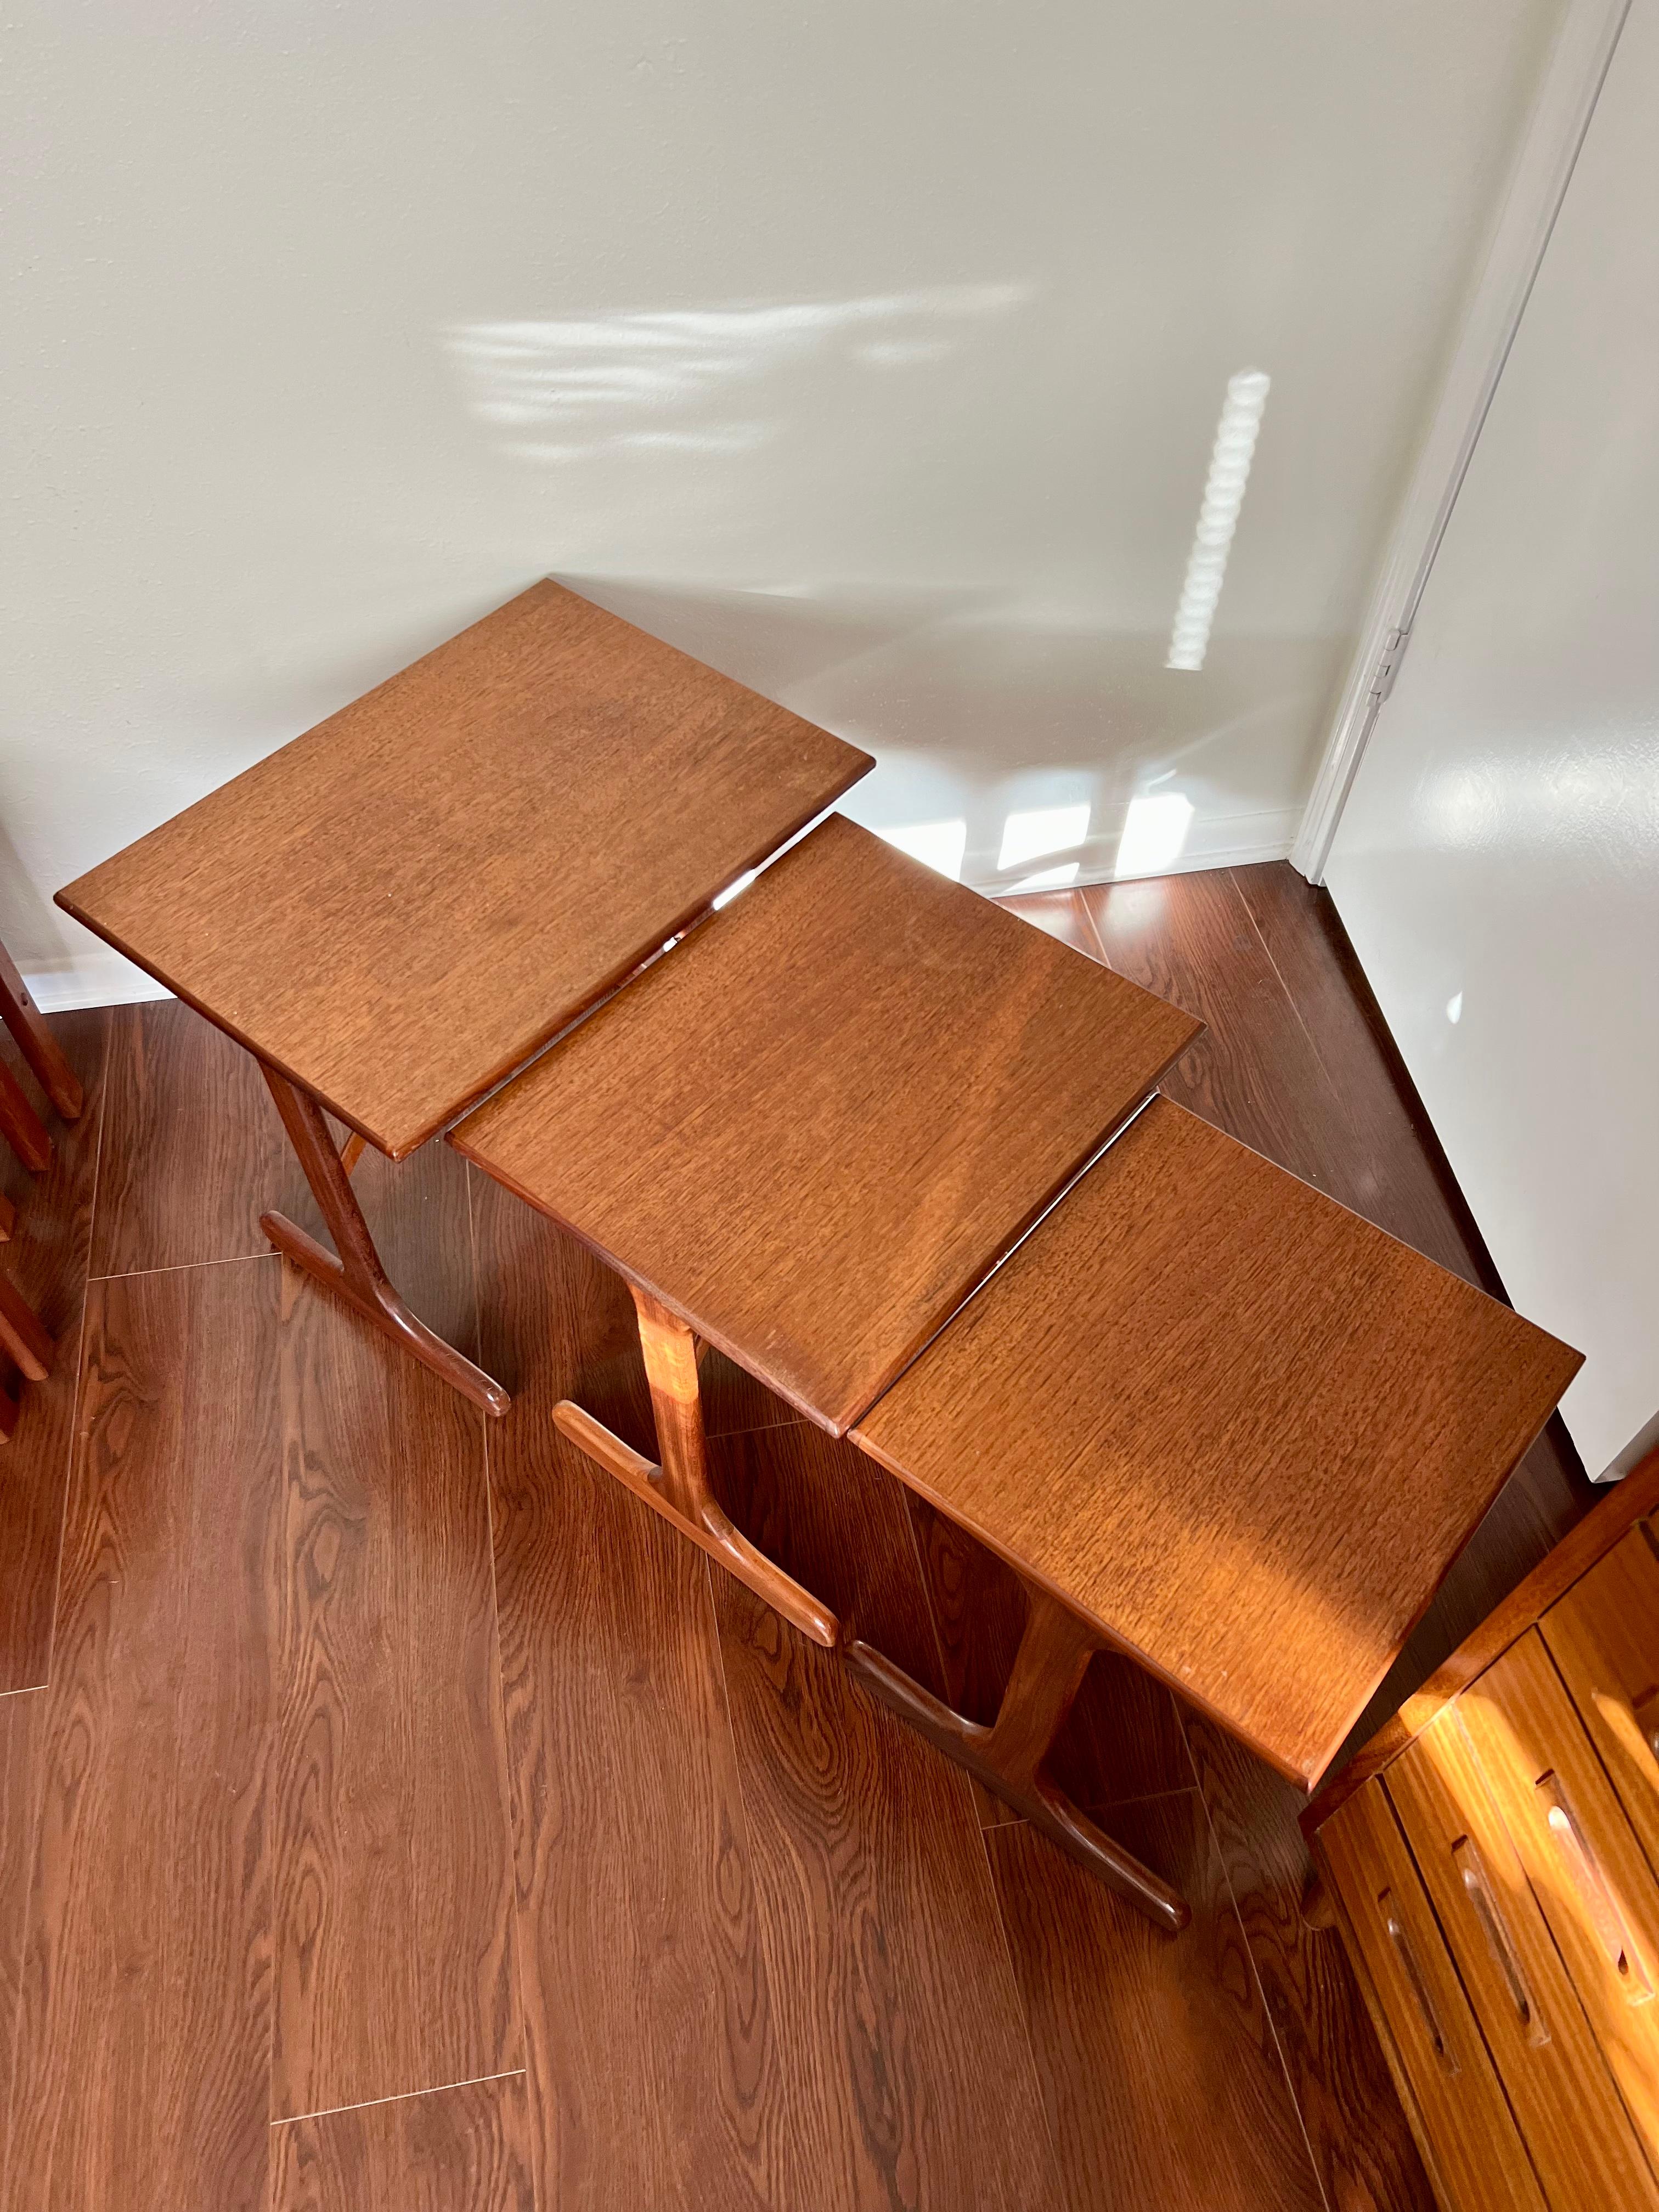 Nesting tables are so useful and stylish, which is why I always carry at least one set! A curvy set by G plan and is in very good original condition. 

Dimensions: 
G plan: 21” H x 23” W x 16” D.
  